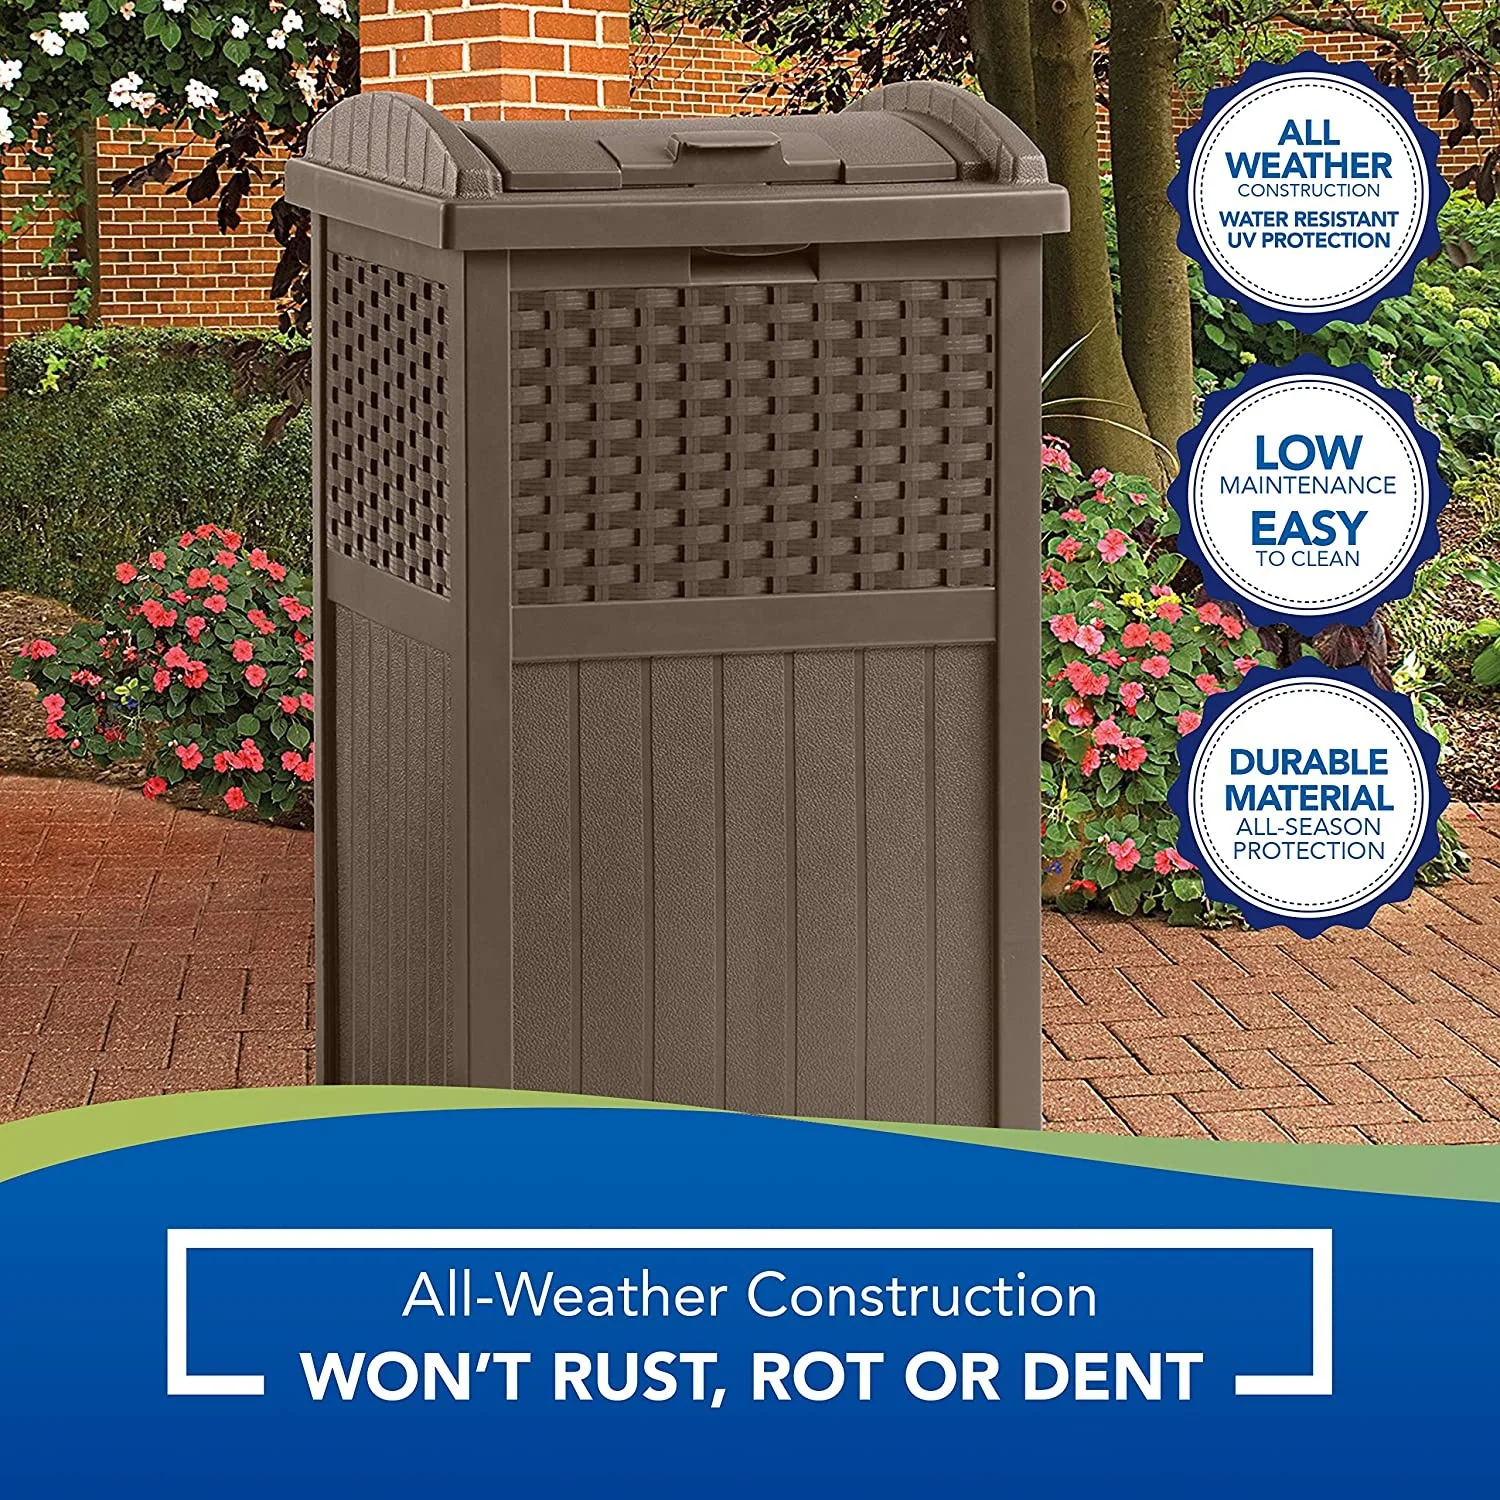 33 Gallon Hideaway Can Resin Outdoor Trash with Lid Use in Backyard, Deck, or Patio